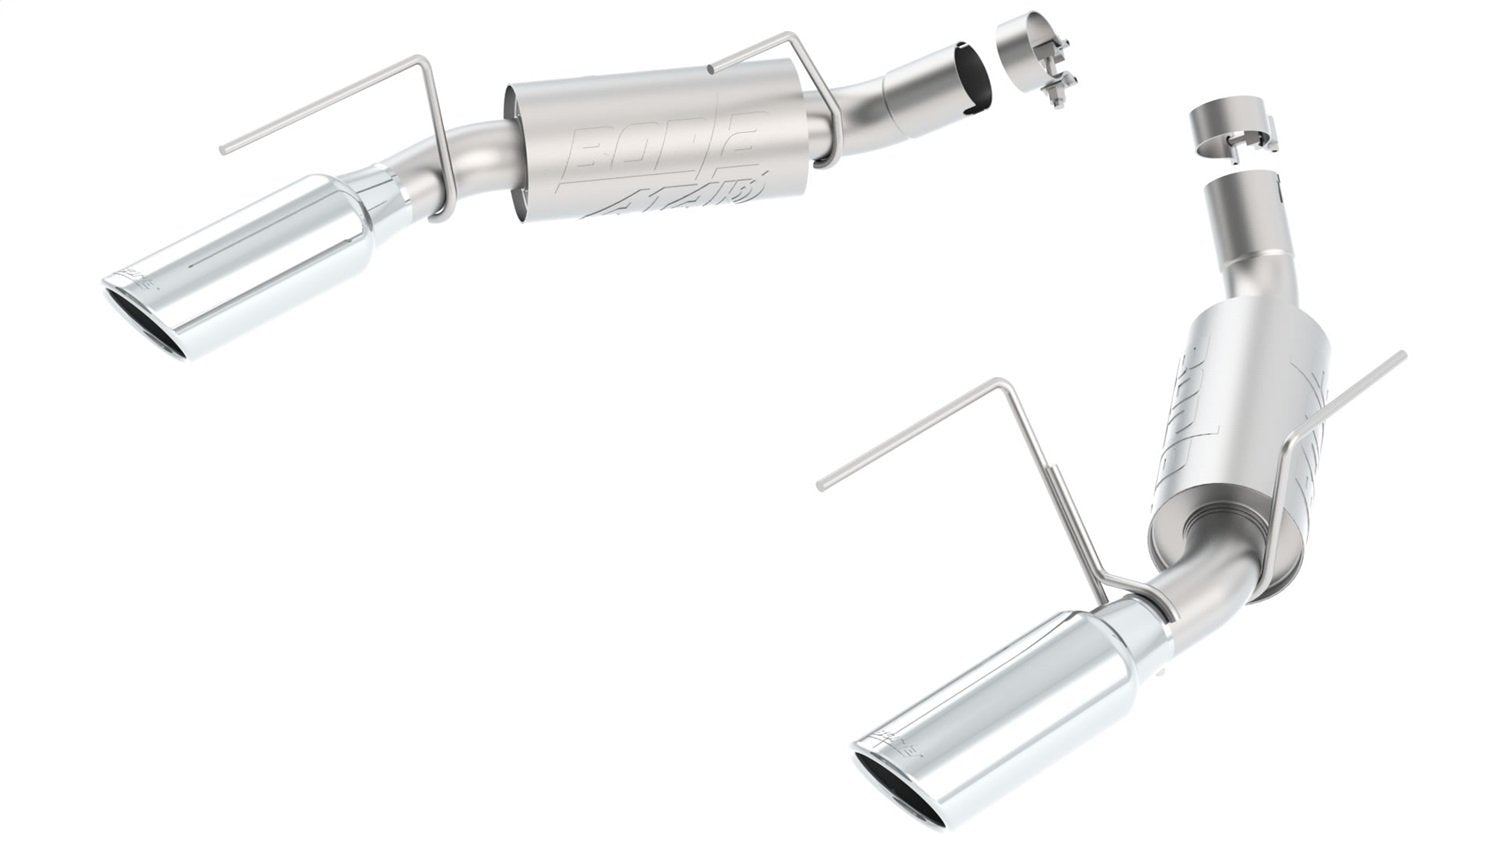 Borla 11806 Aggressive Rear Section ATAK Exhaust System for Mustang GT 4.6L AT/MT RWD